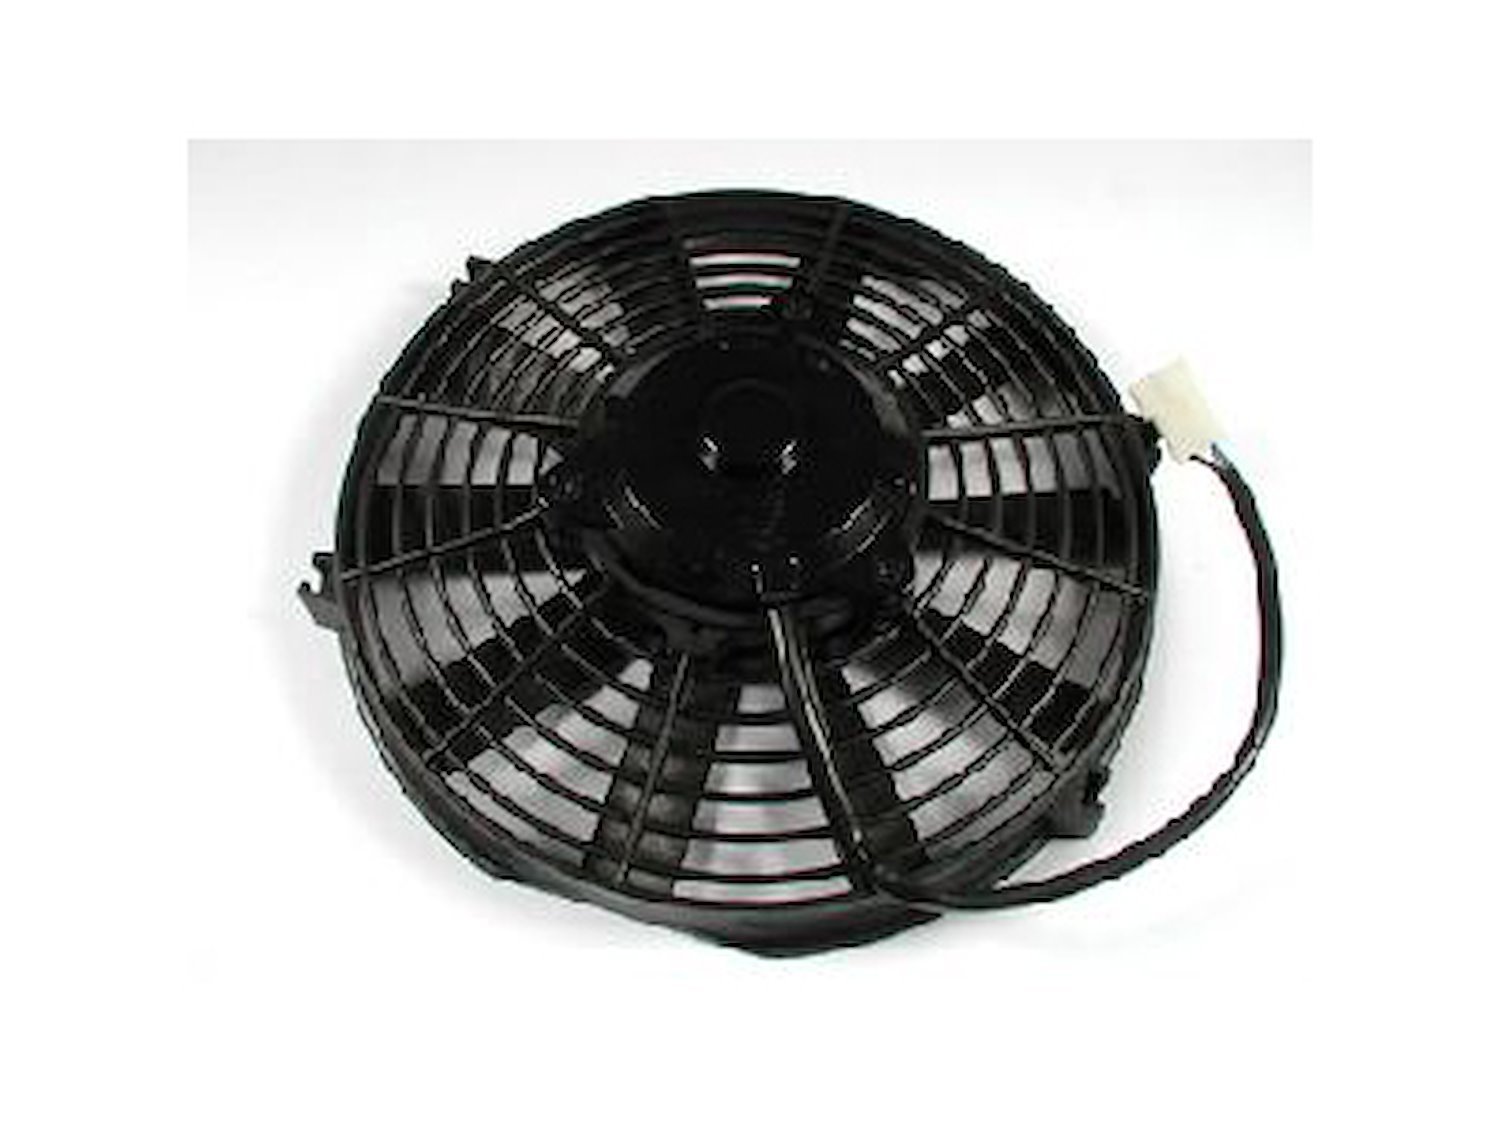 12" Electric Fan: Thickness 3.09"  1400 CFM  2300 RPM  10.2 amp draw